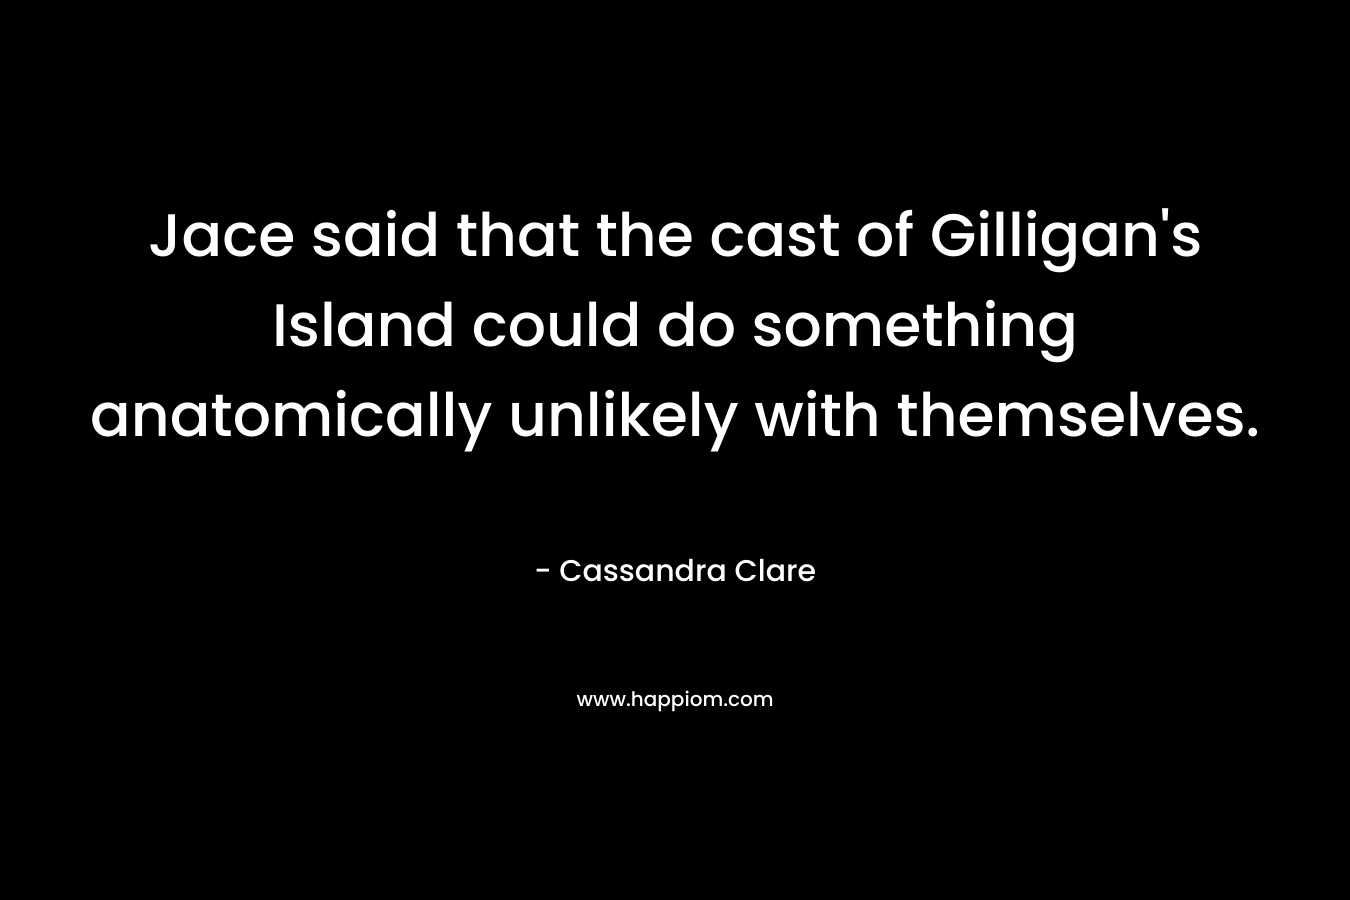 Jace said that the cast of Gilligan's Island could do something anatomically unlikely with themselves.